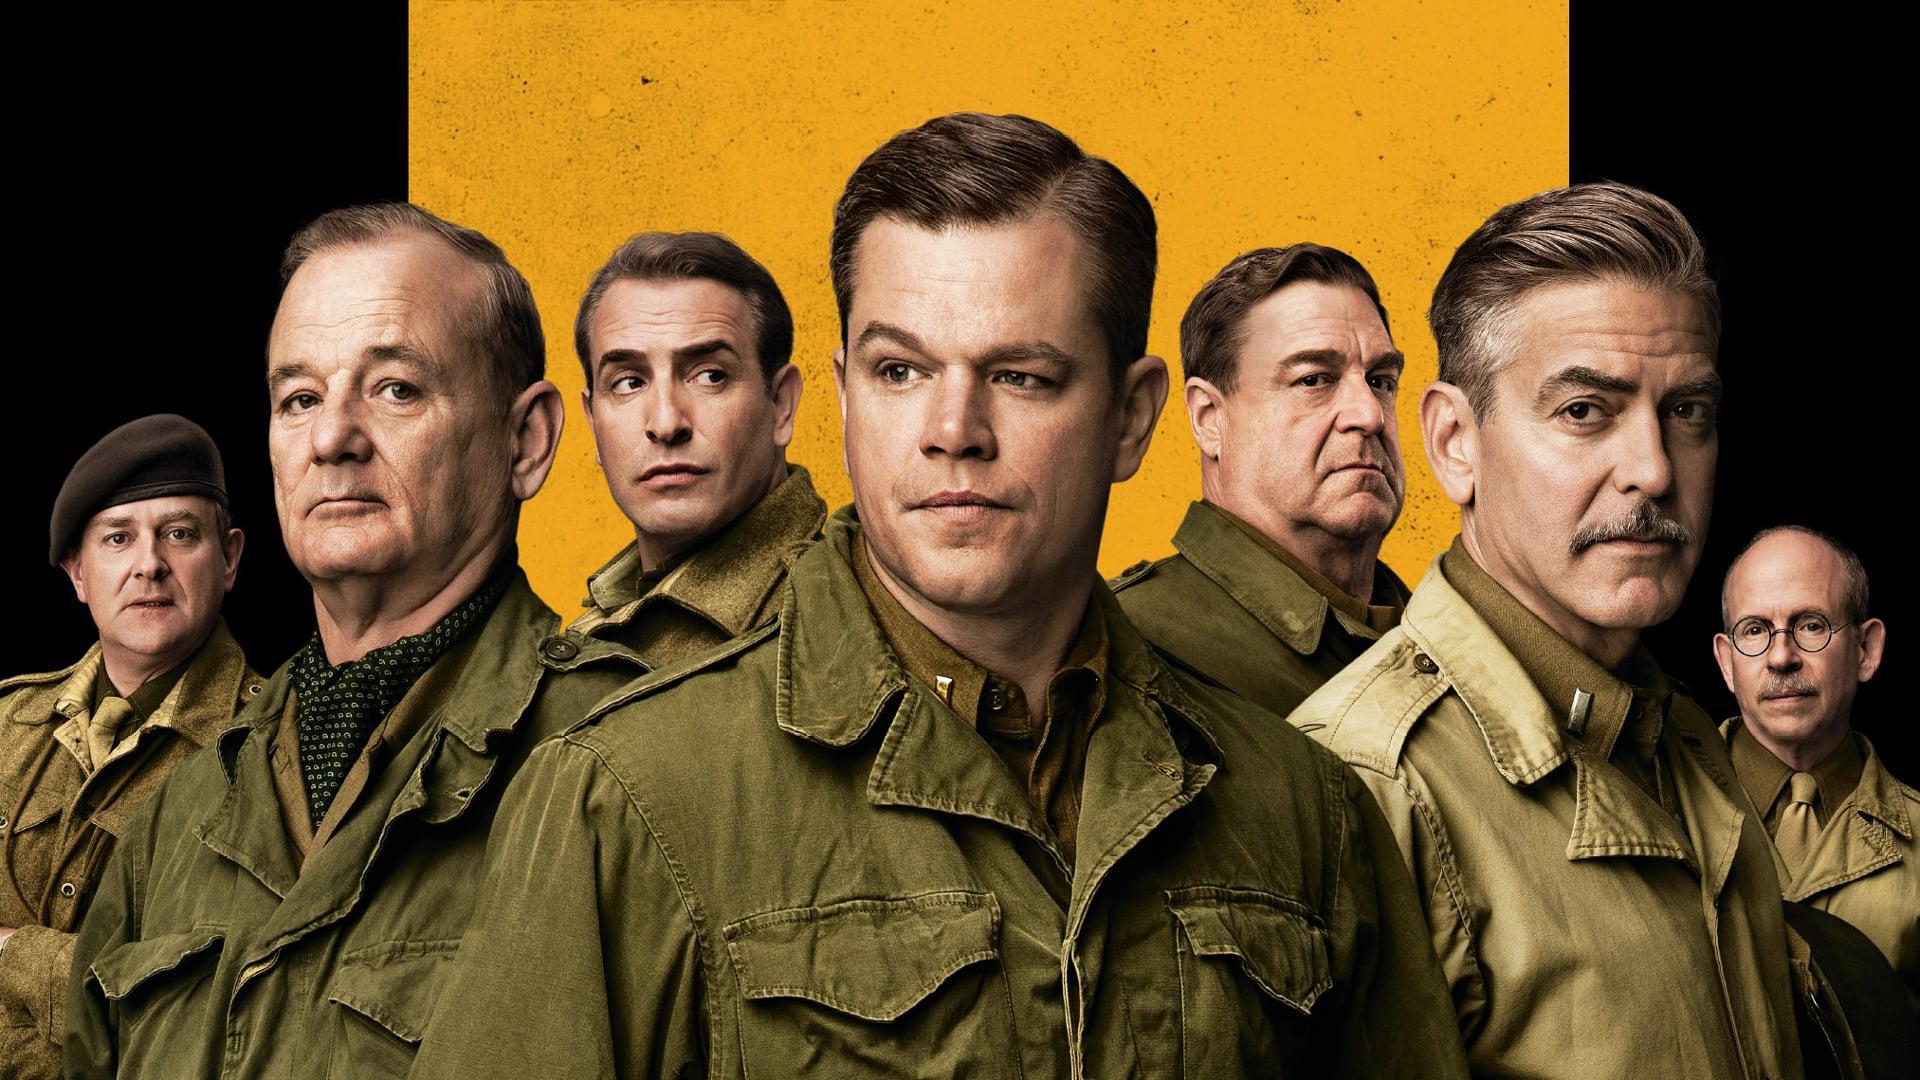 Backdrop Image for The Monuments Men